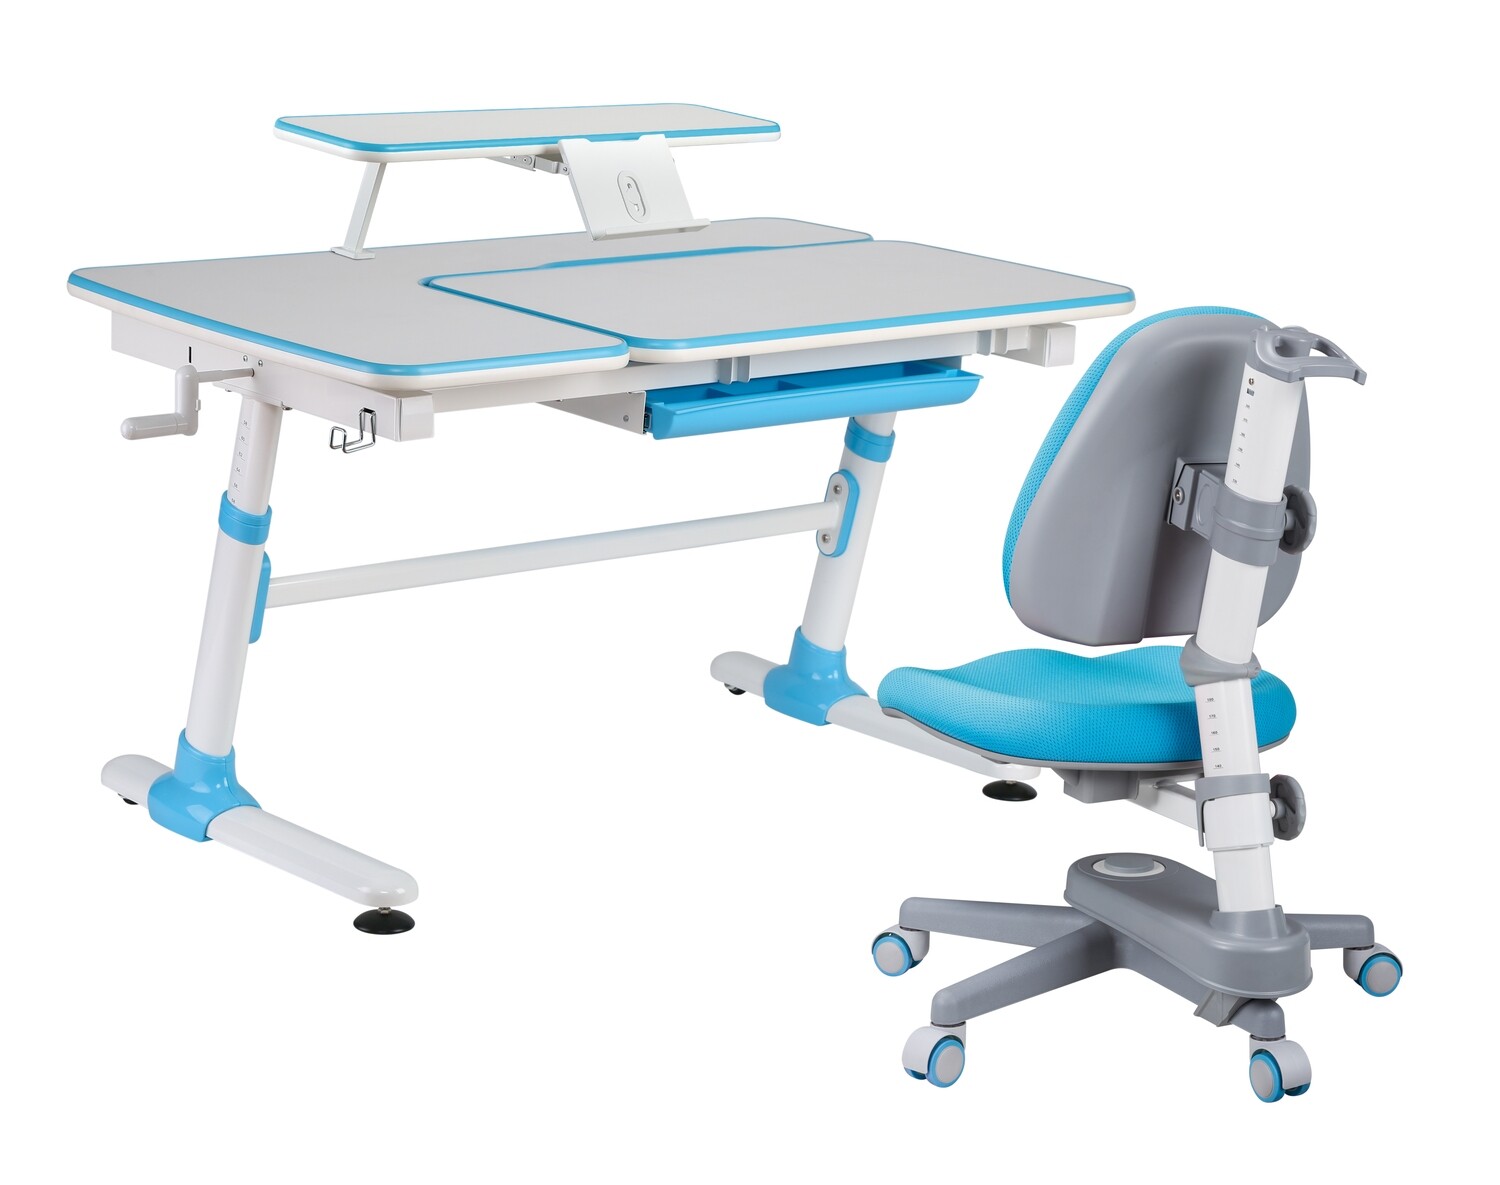 KIDOMATE Ergonomic Study Table and Chair Set for Kids Students